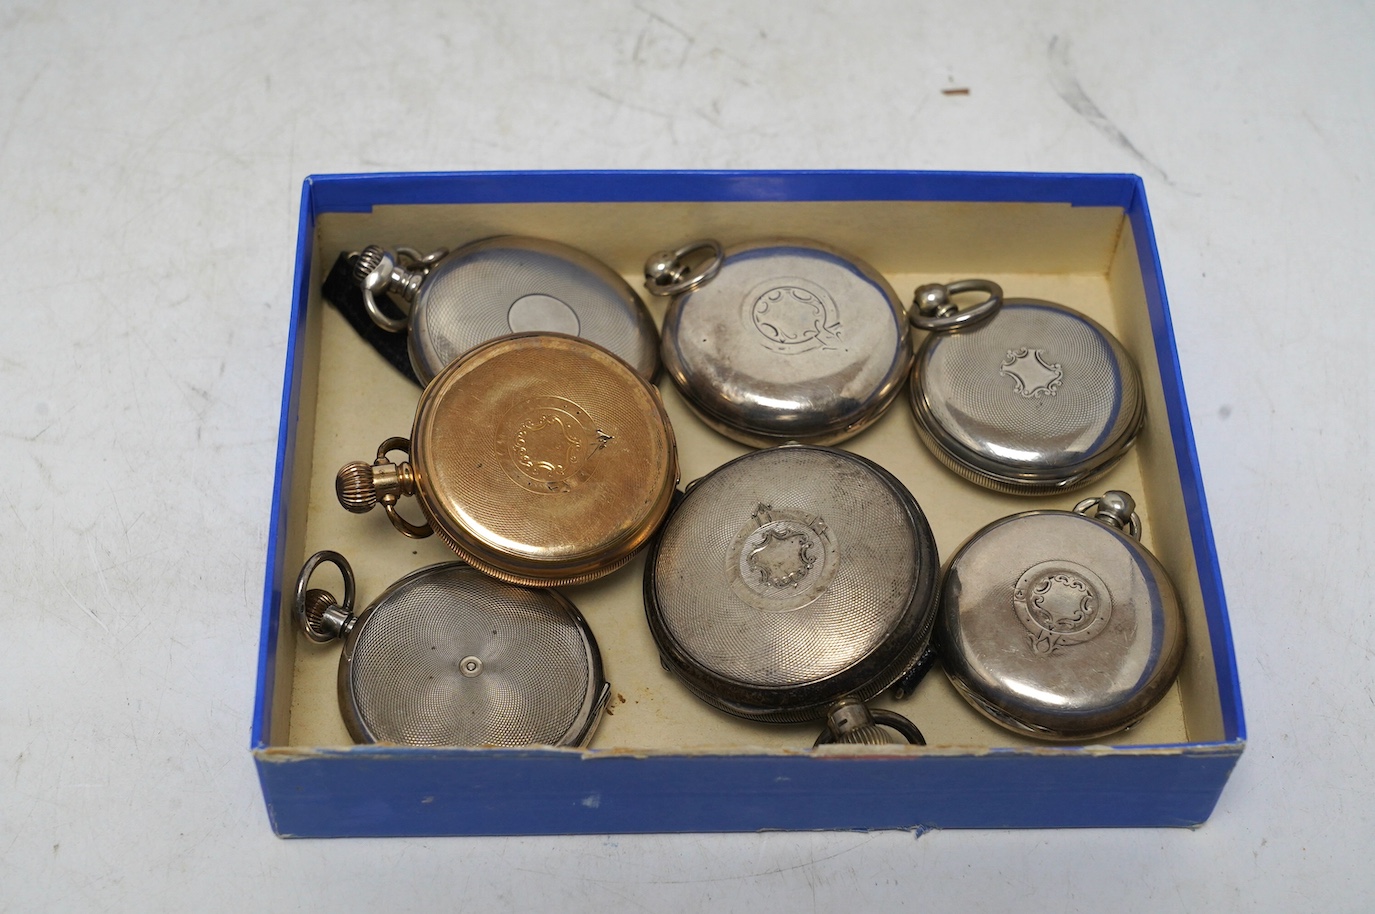 Six assorted open face pocket watches including silver and gold plated and a silver hunter pocket watch. Condition - poor to fair